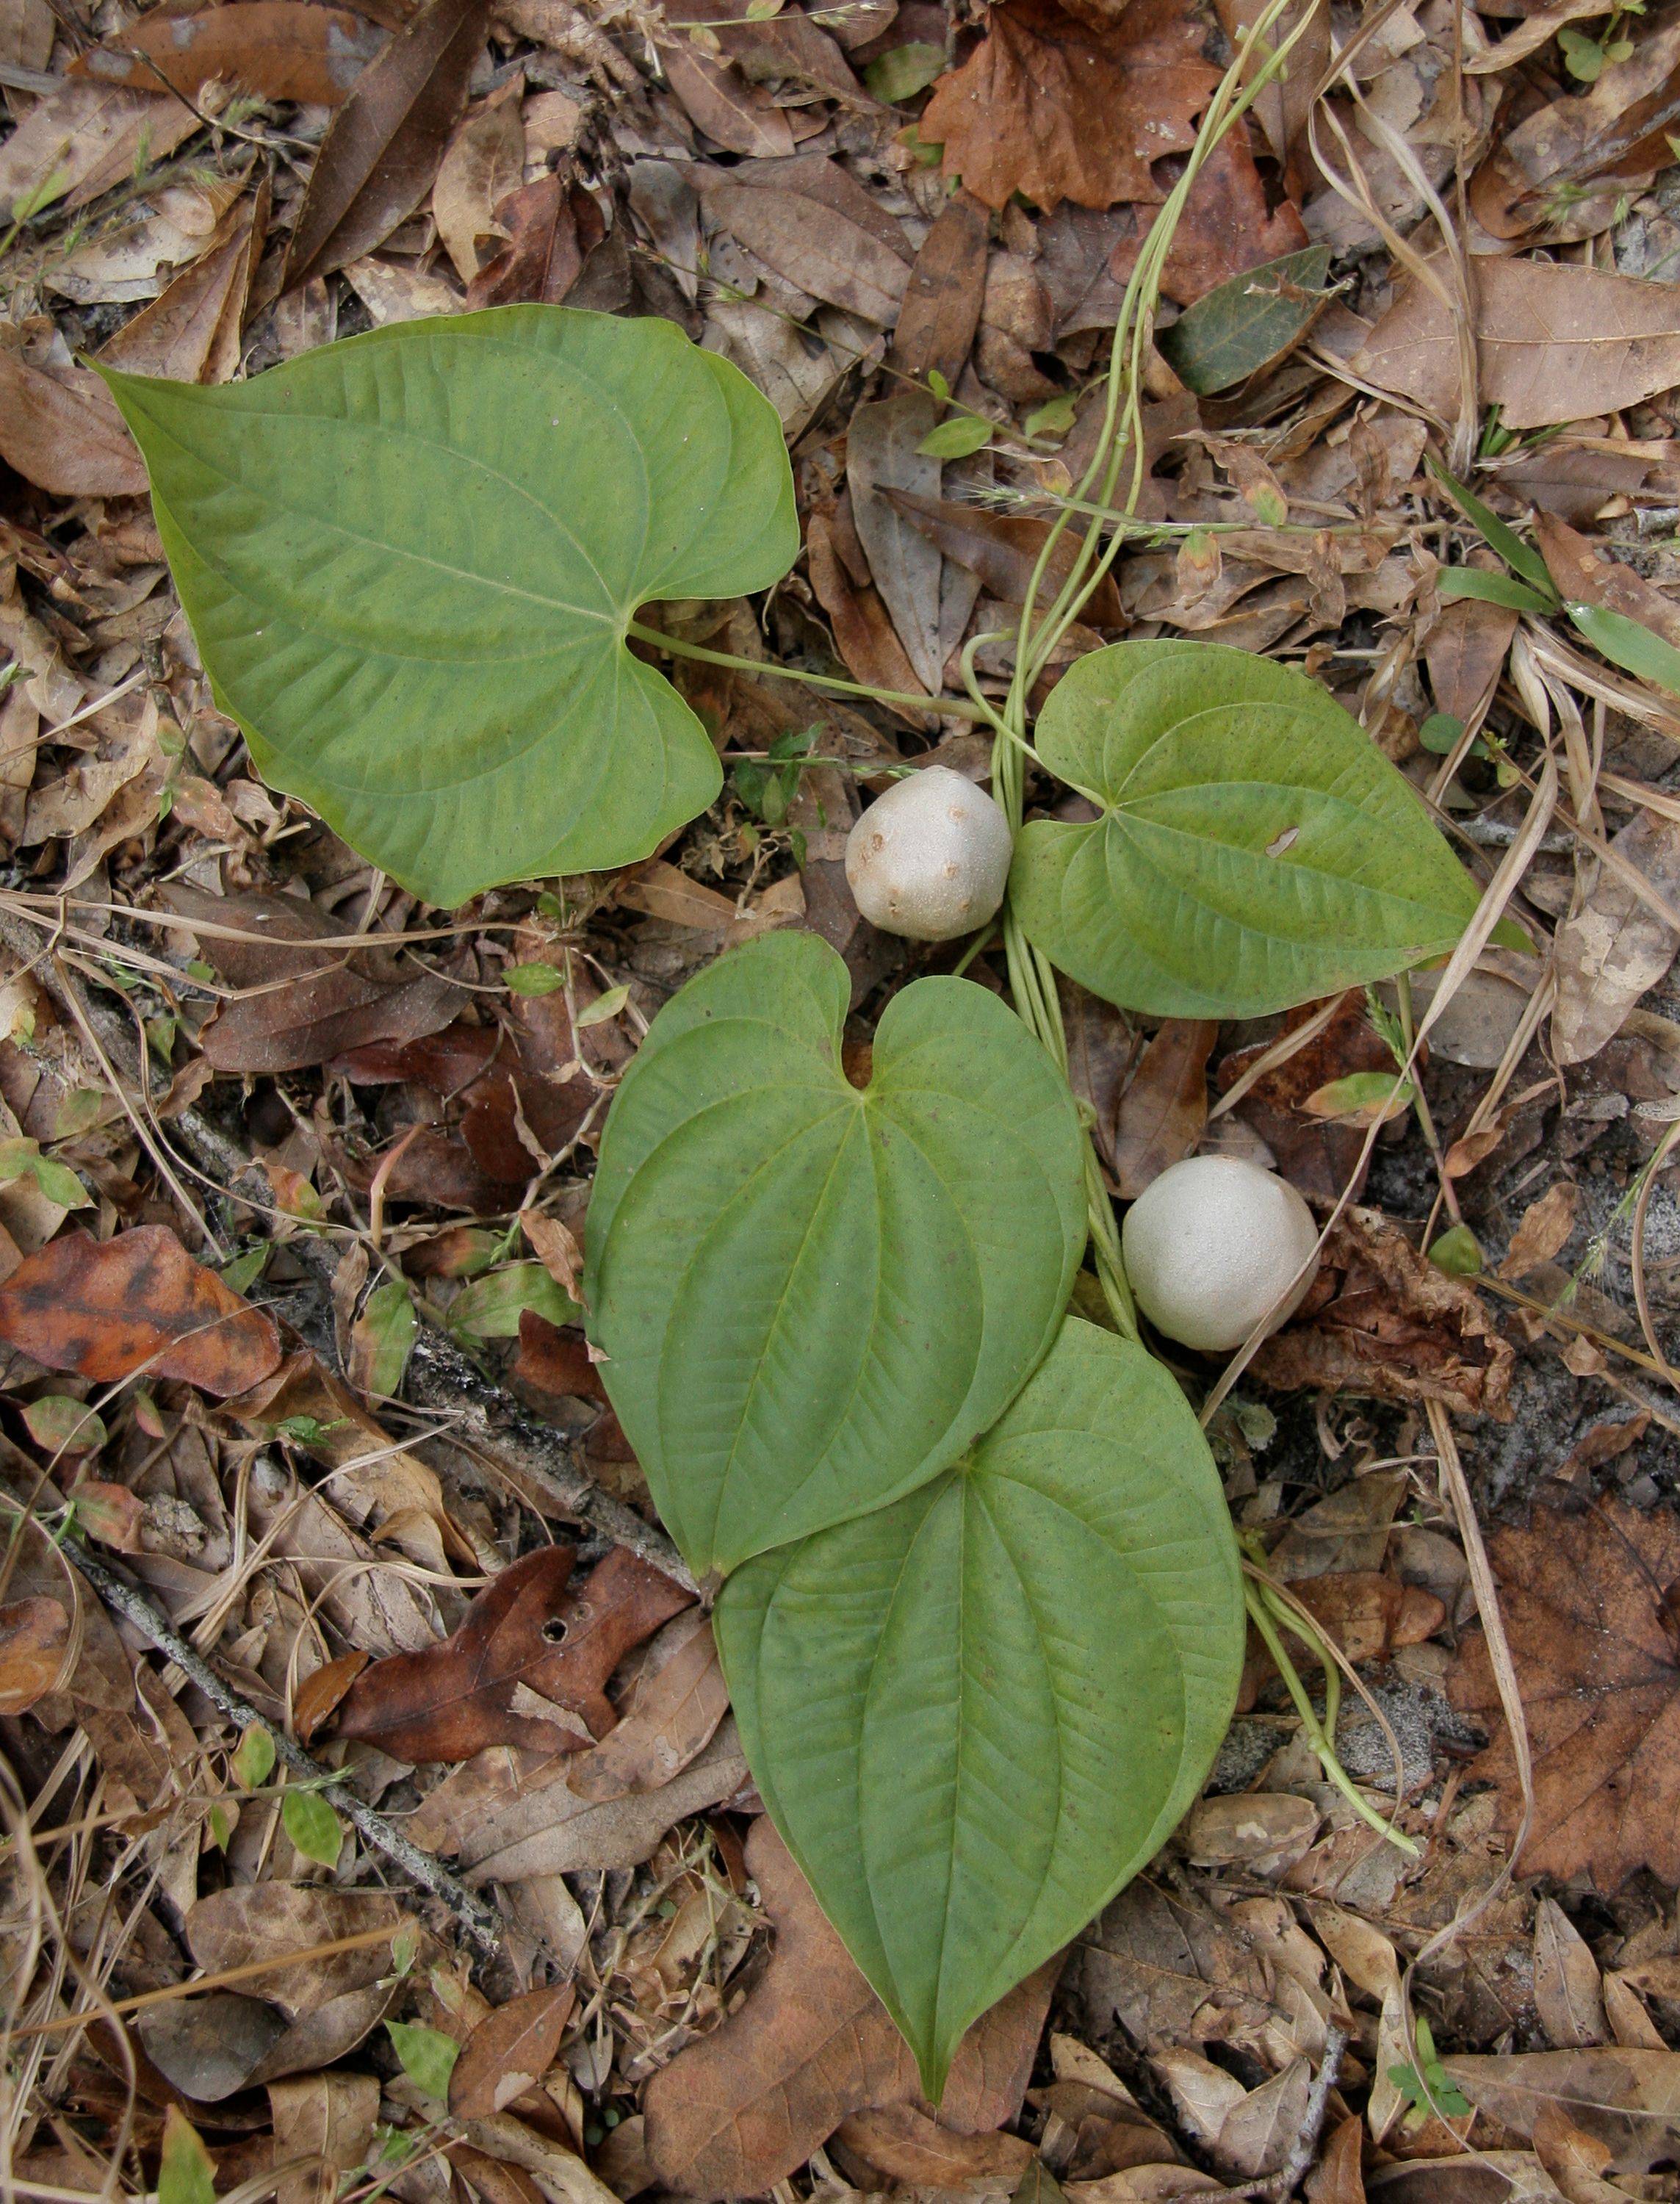 Identification of pests is vital to determining the appropriate management plan. The air potato vine, Dioscorea bulbifera, is an invasive vine in Florida and poses a threat to our native species. However, it is frequently confused with several other vines including many species of morning glory and pothos. 